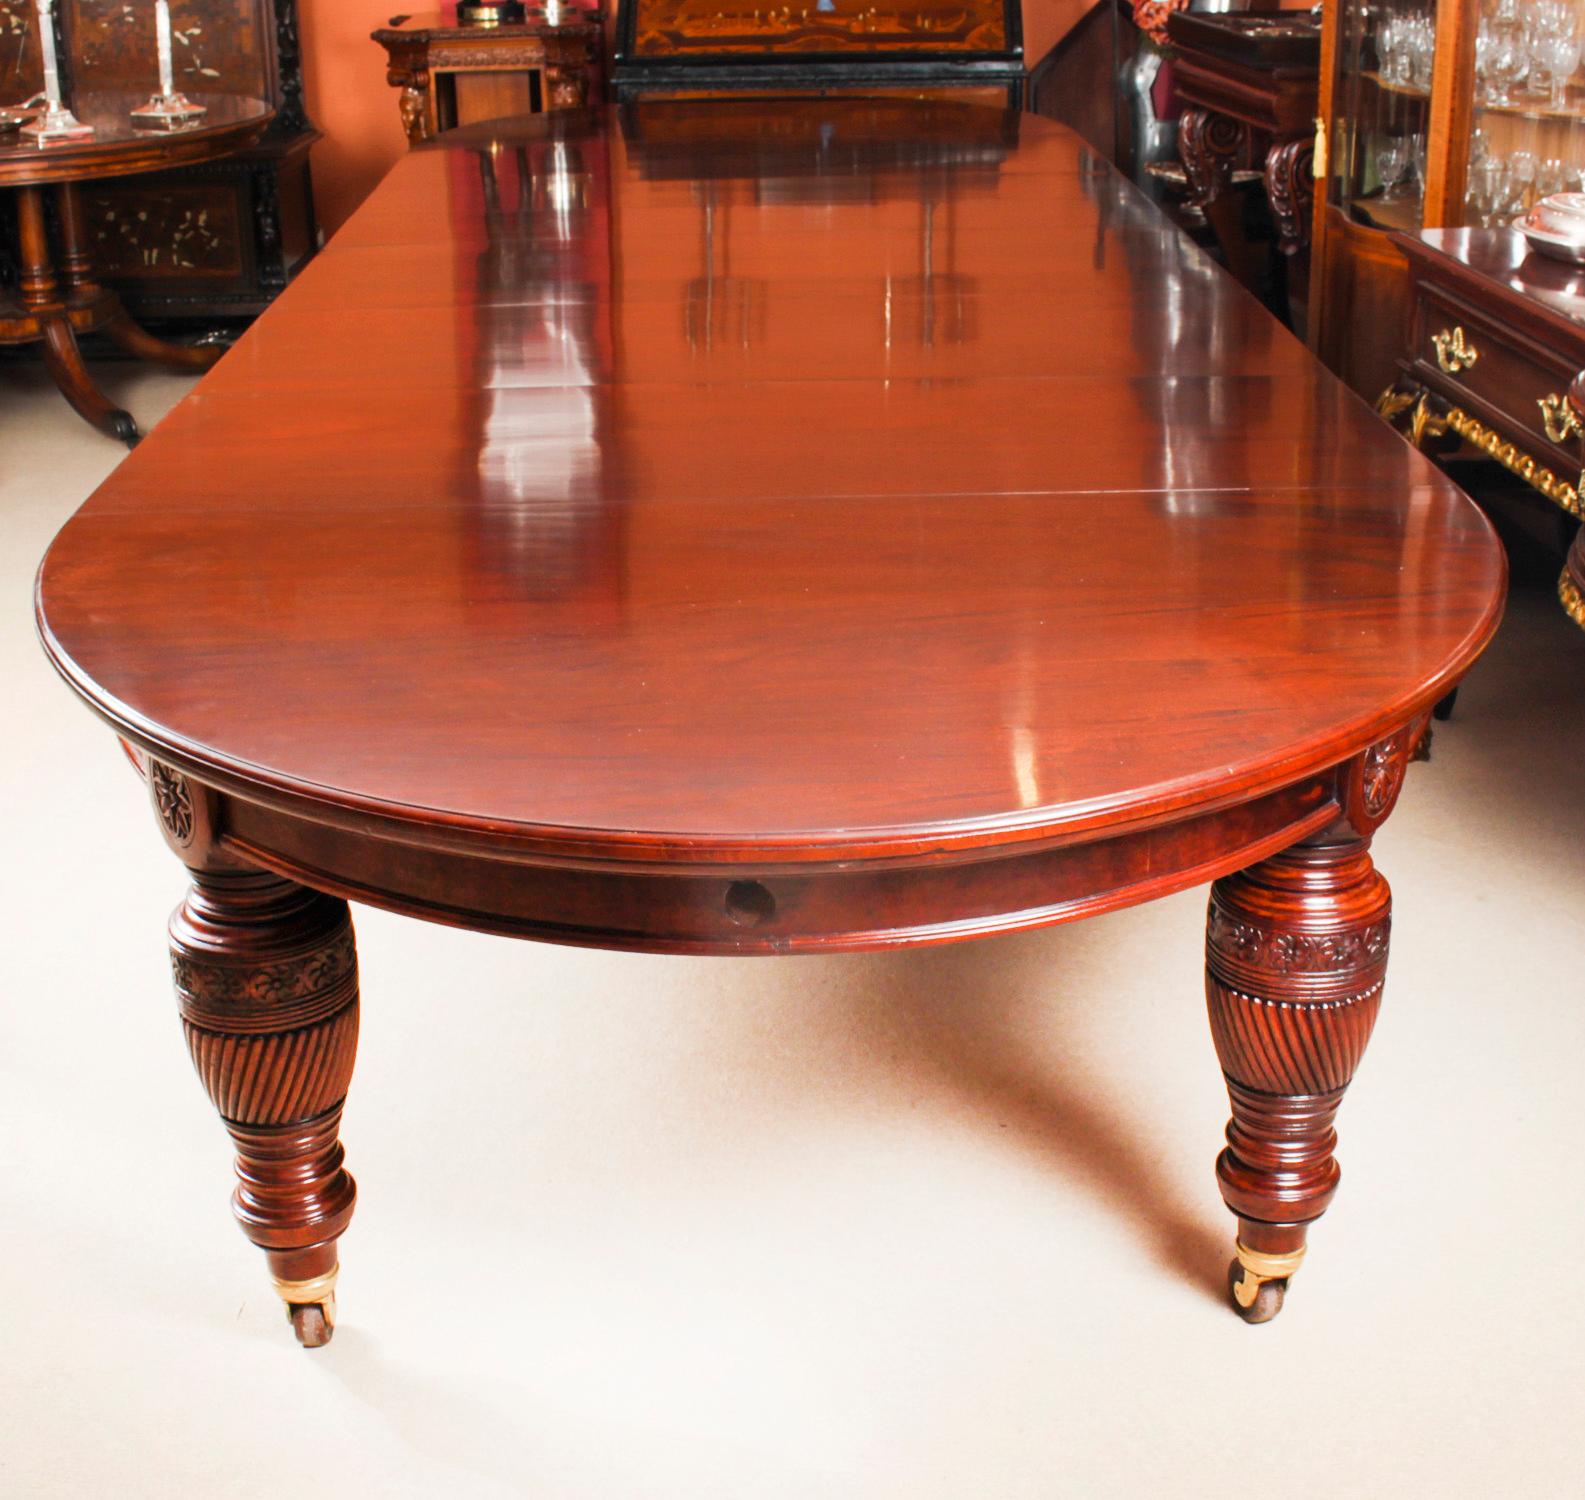 English Antique 19th C 16ft Flame Mahogany Extending Dining Table & 16 chairs